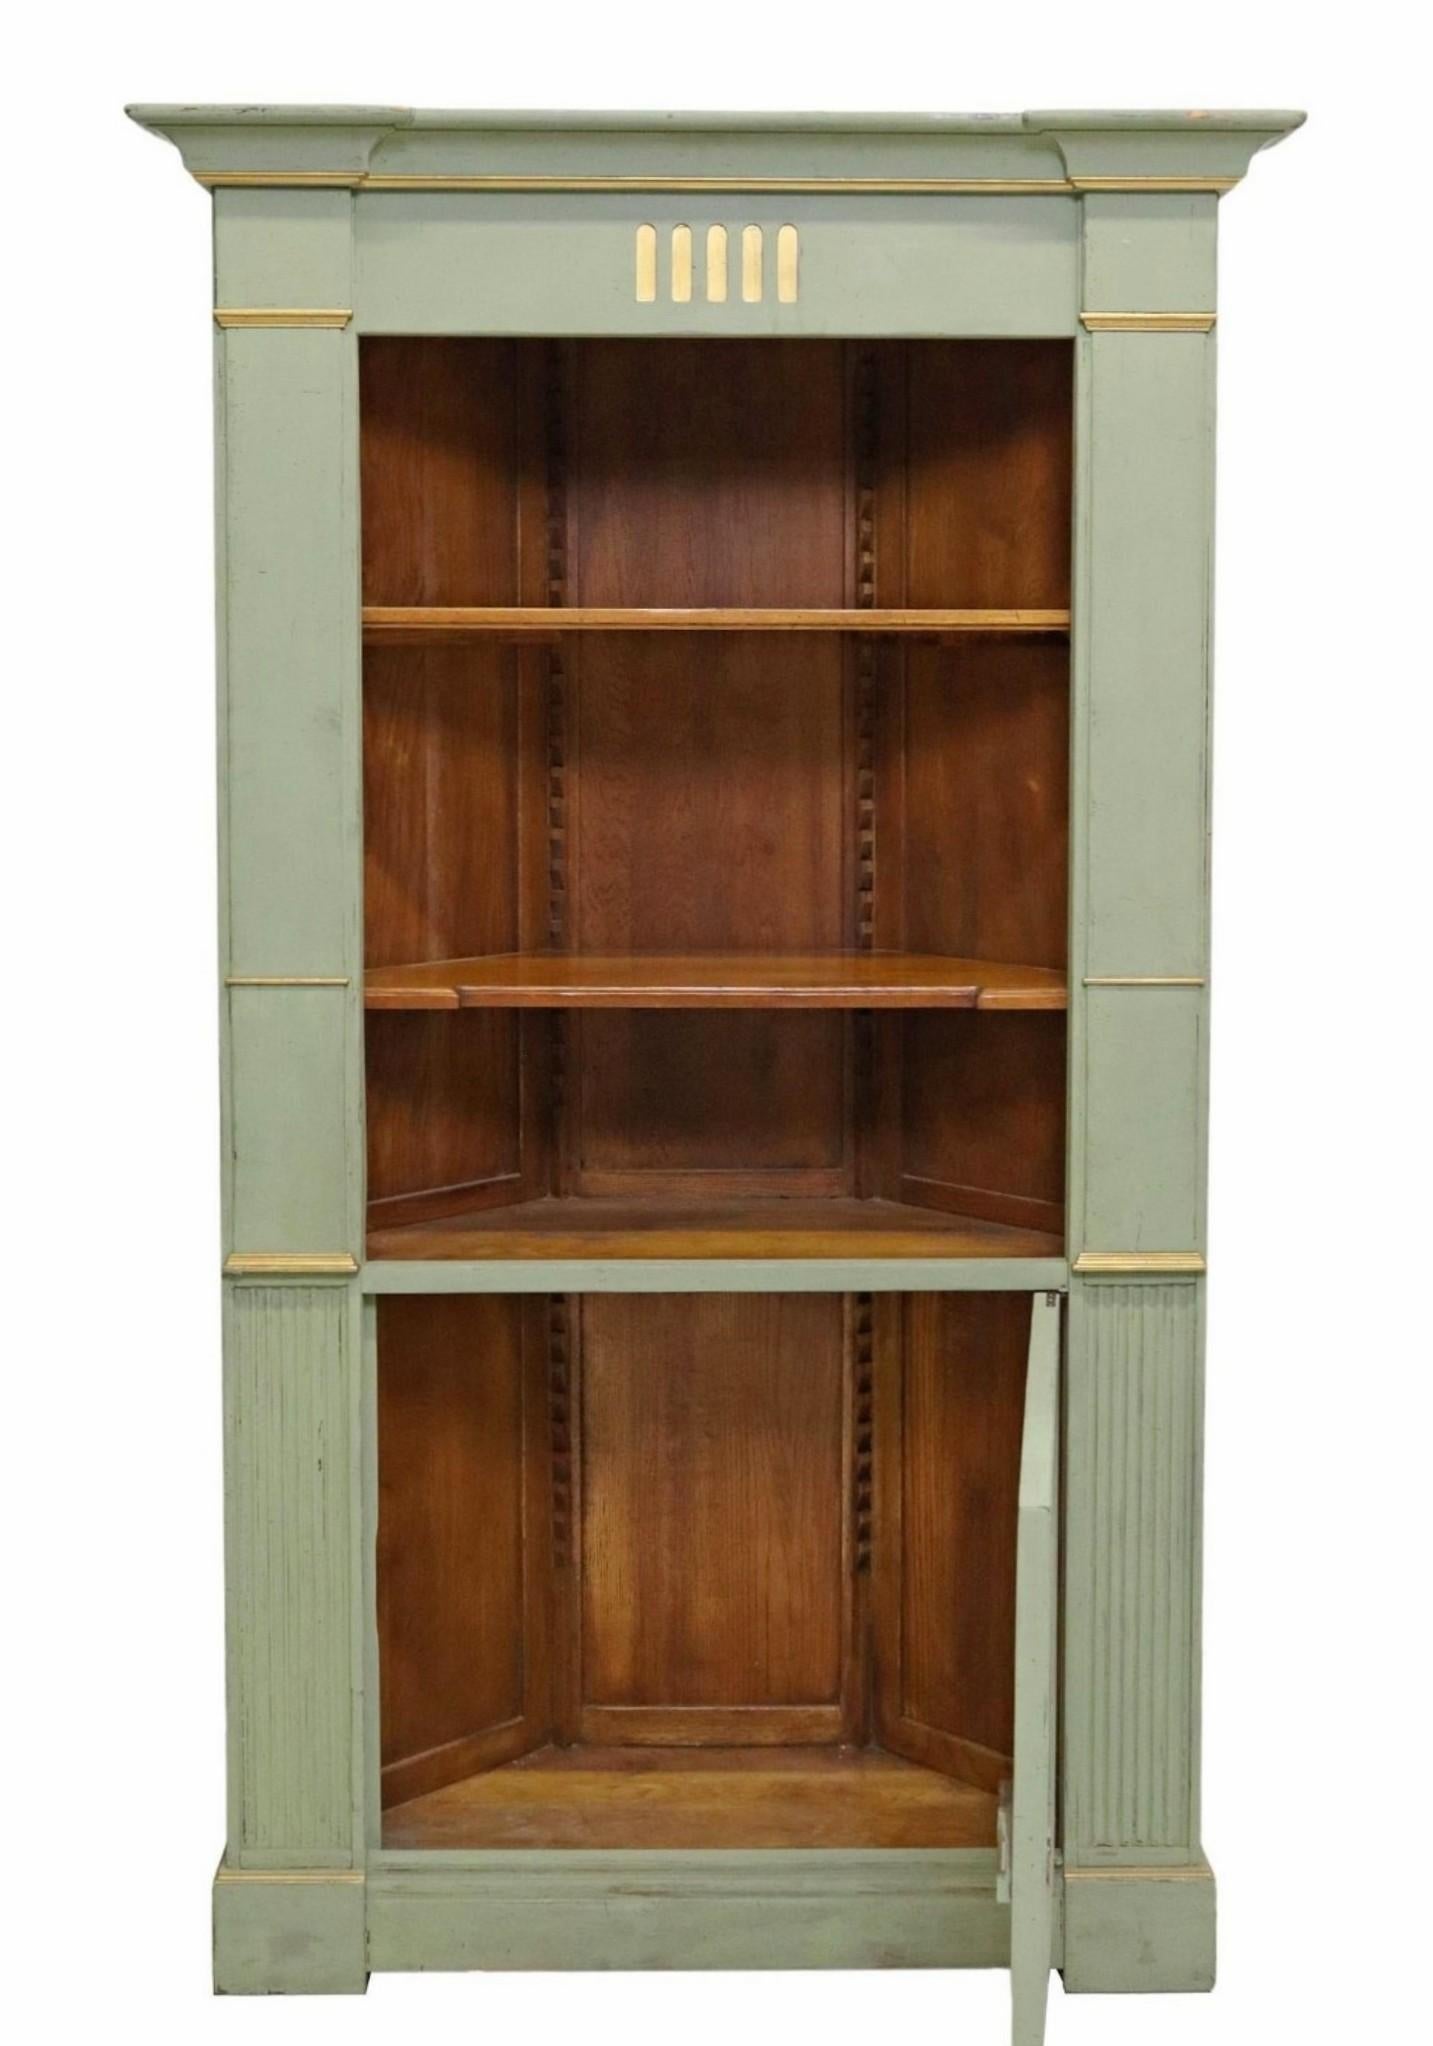 A wonderful vintage Provincial parcel gilt and soft light pale green painted wood corner cabinet by de Bournay. 

Born in France in the mid-20th century, exquisitely hand-crafted in Swedish Gustavian Louis XVI taste, featuring high-quality